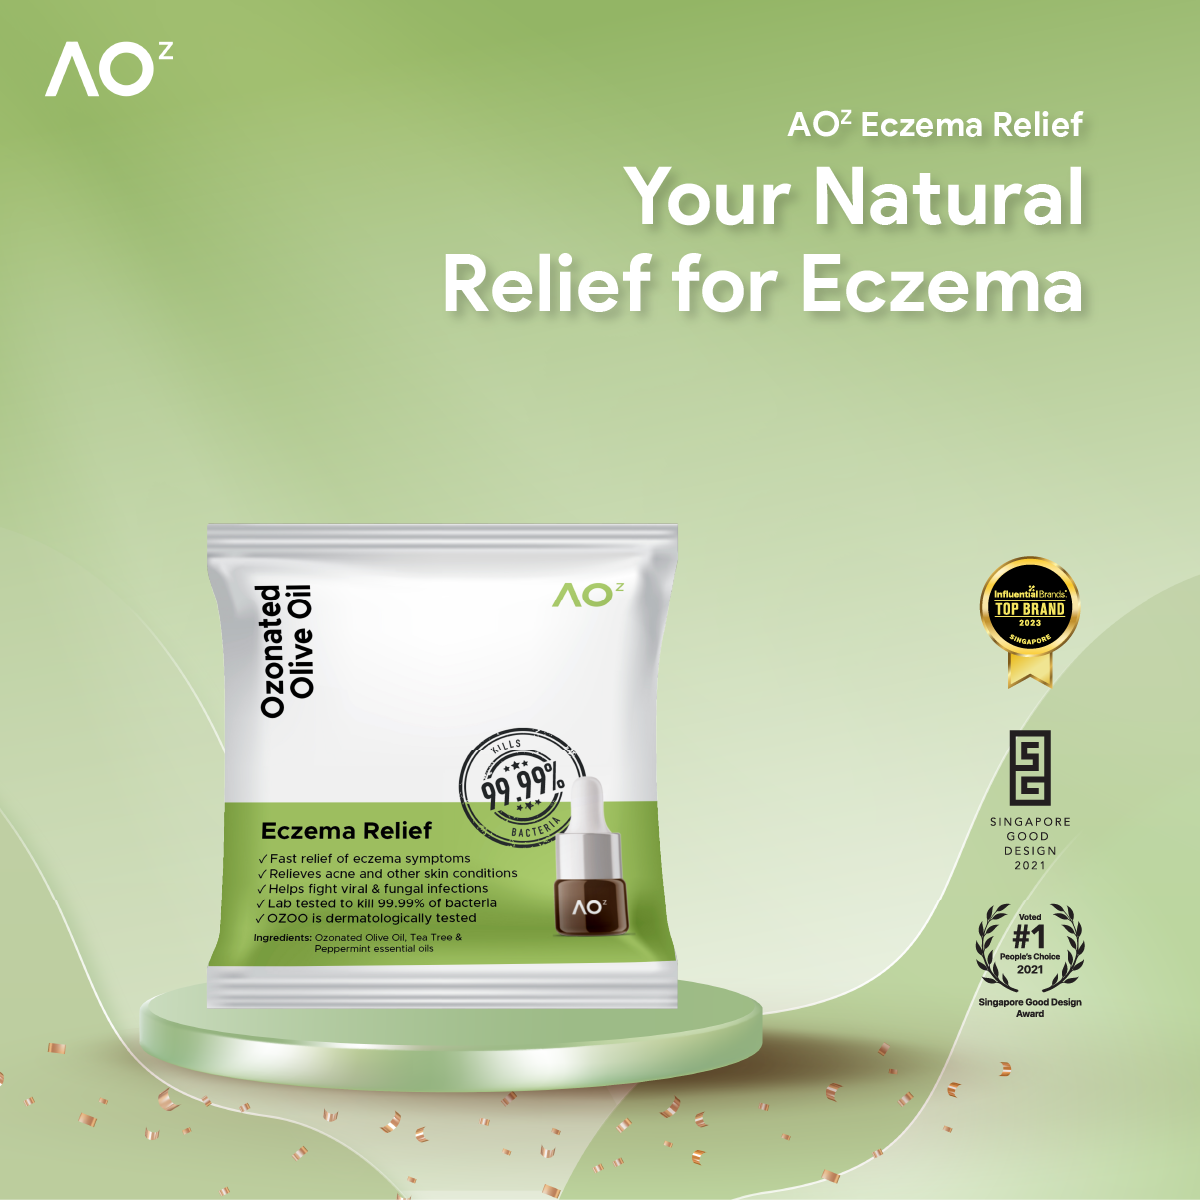 AOᶻ Essential Oil 1ml Tester (Ozonated Olive Oil)